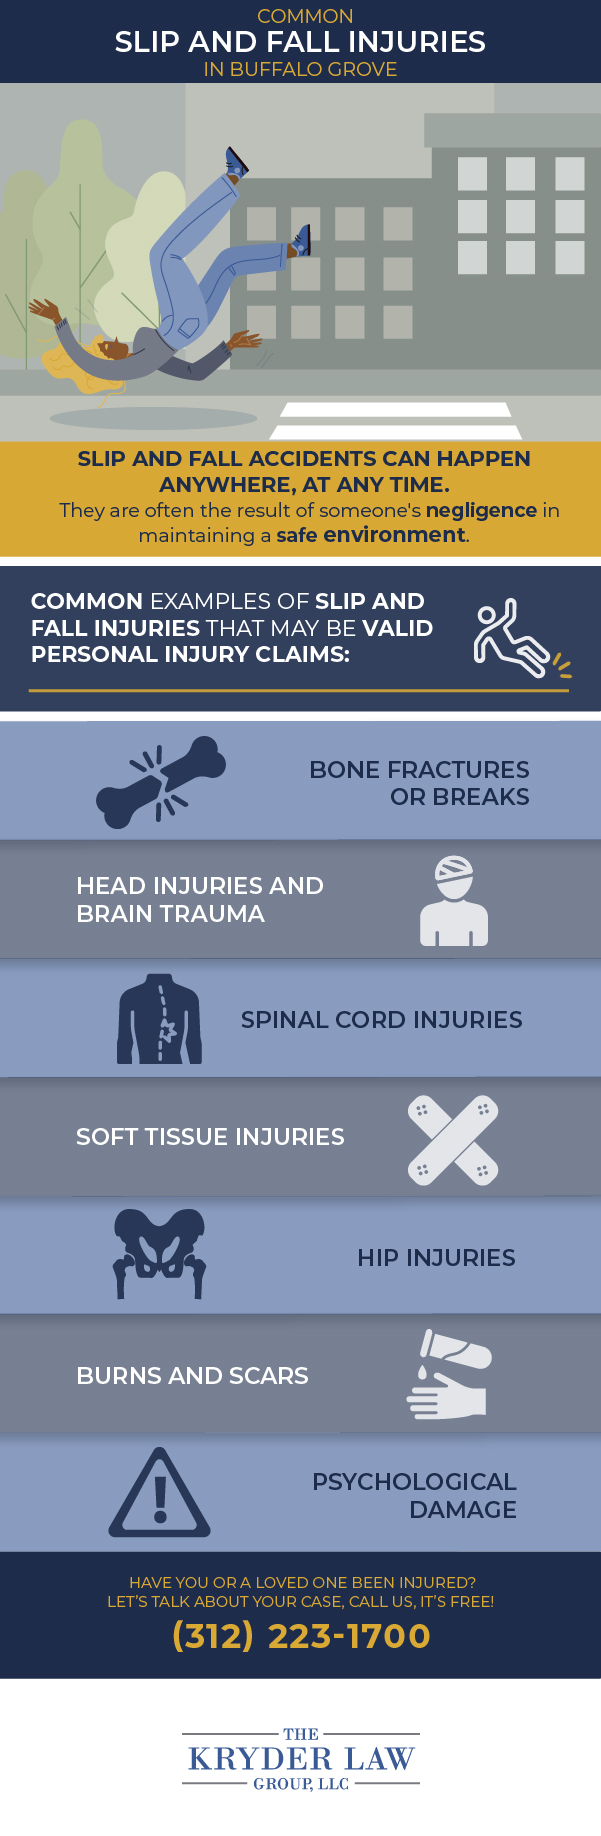 The Benefits of Hiring a Buffalo Grove Slip and Fall Injury Lawyer Infographic